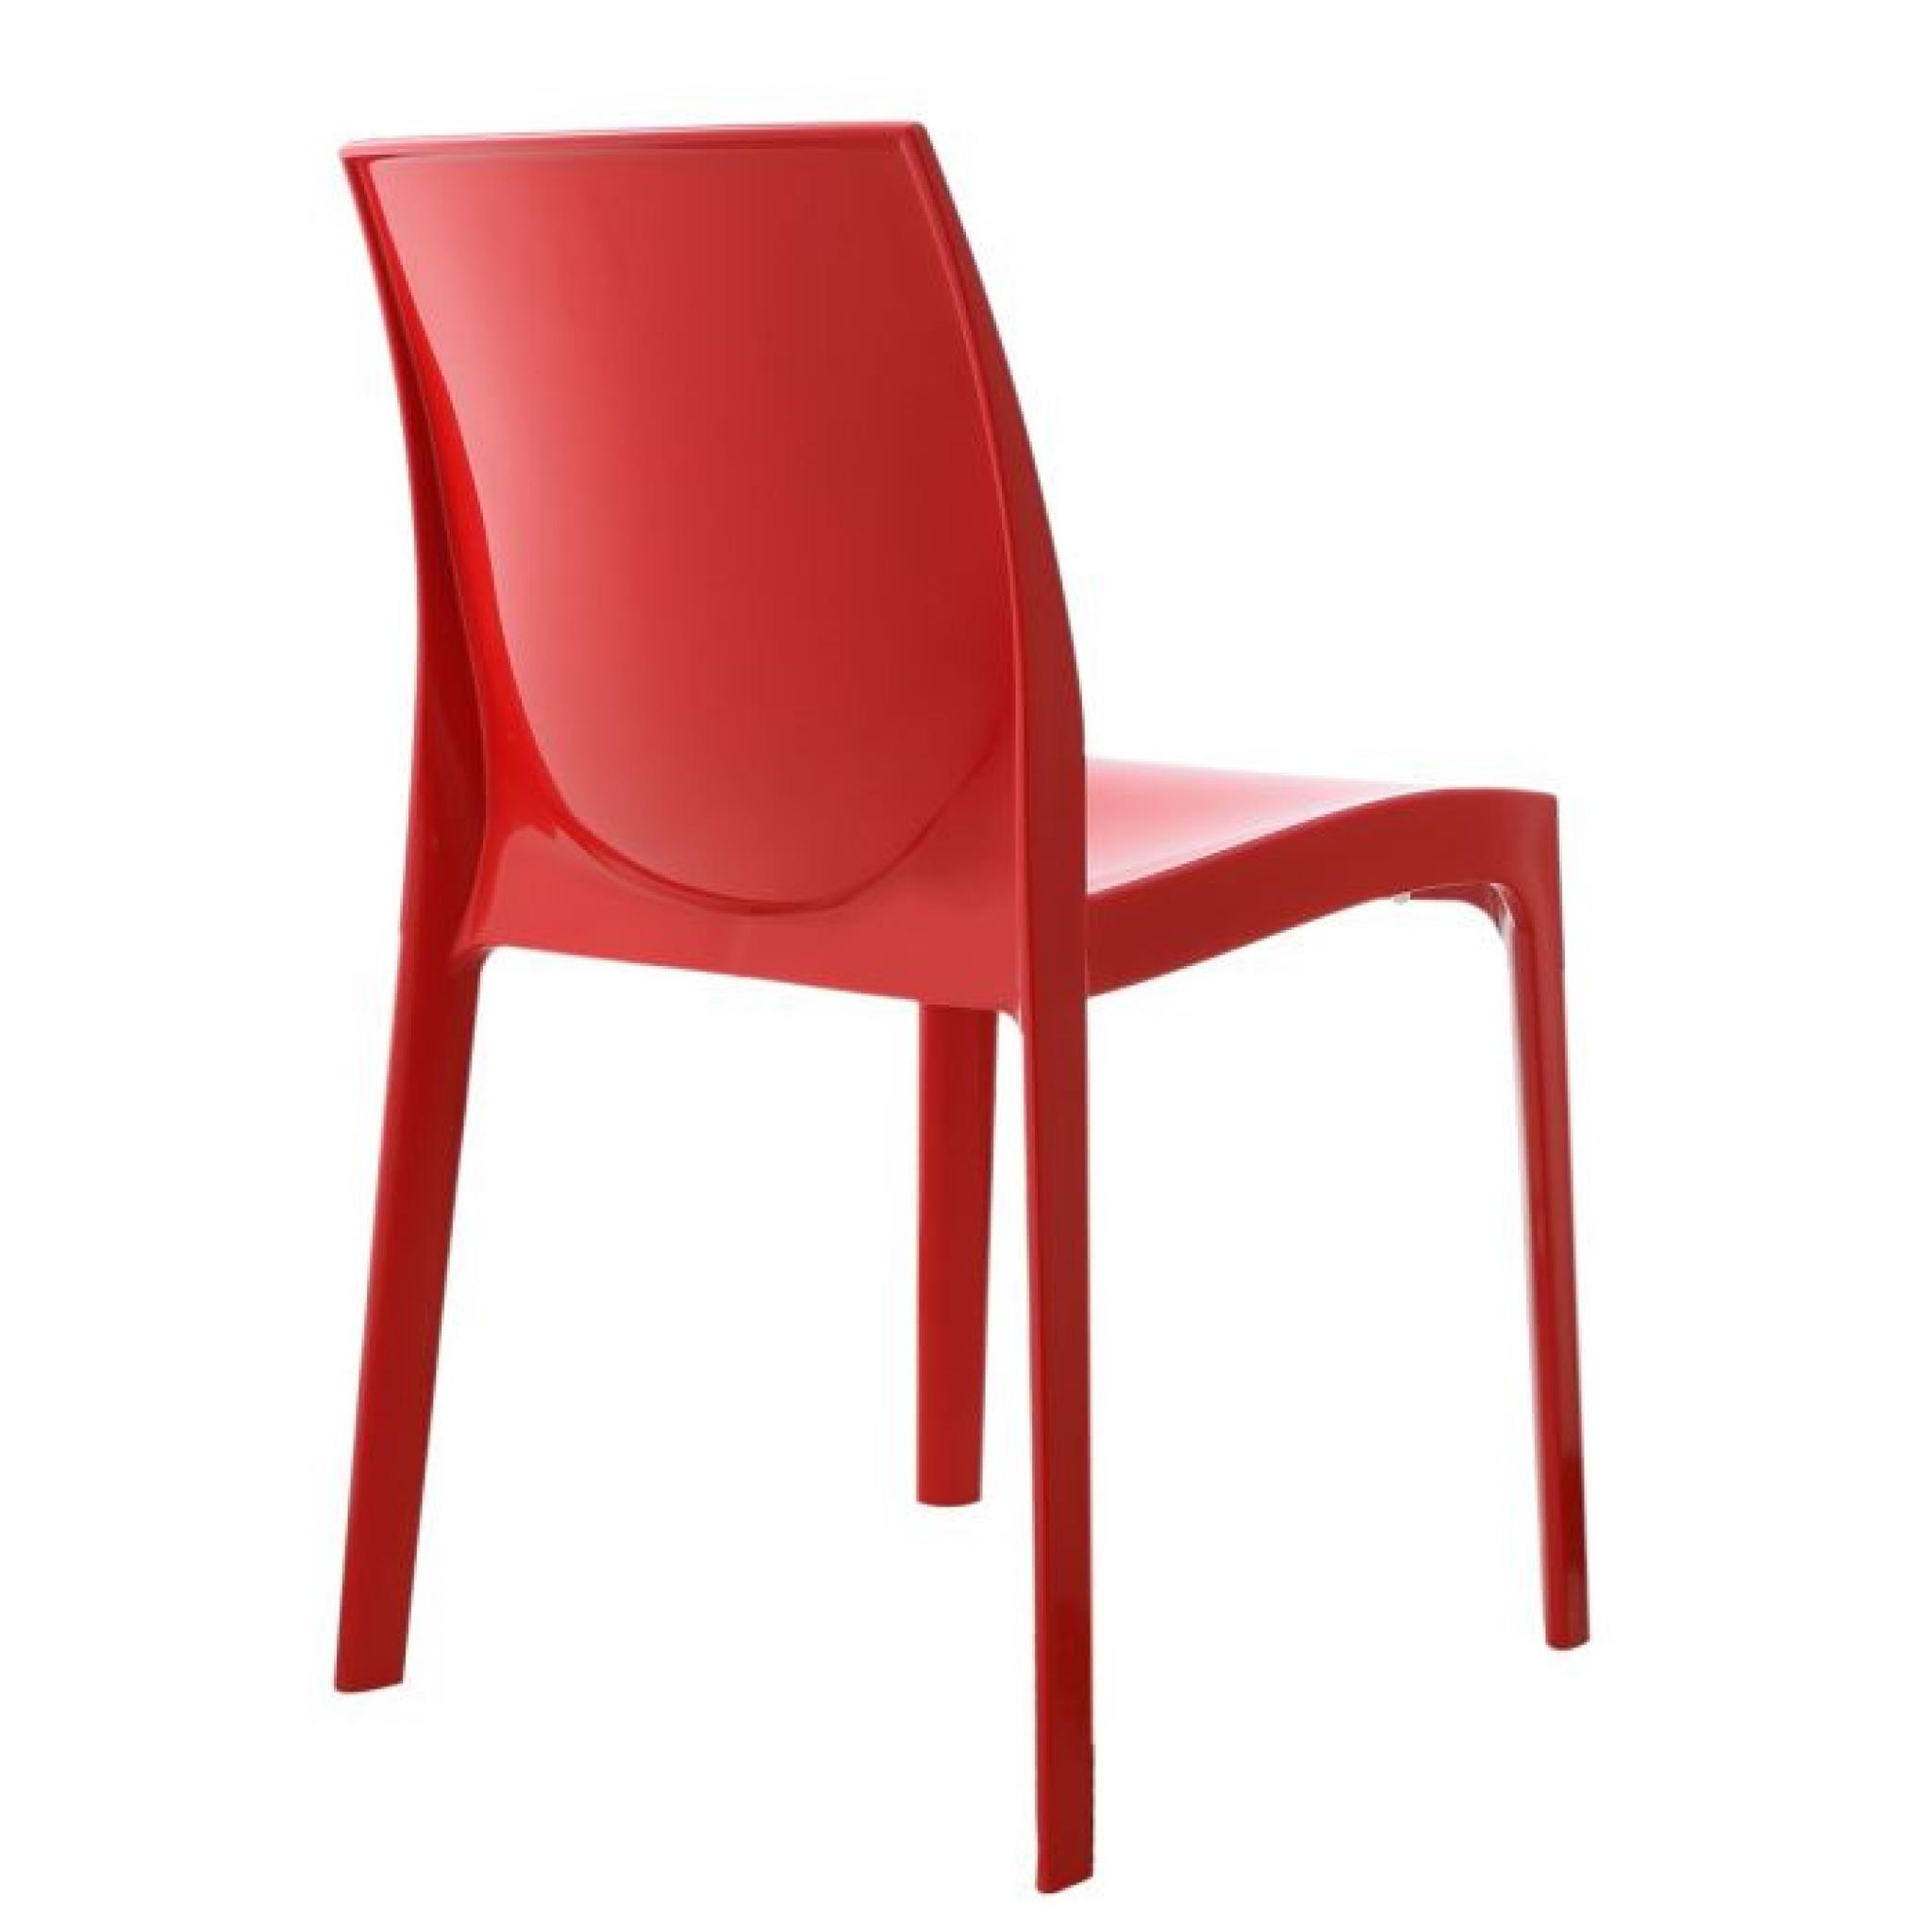 Chaise design rouge laqué Victory  Achat/Vente chaise salle a manger